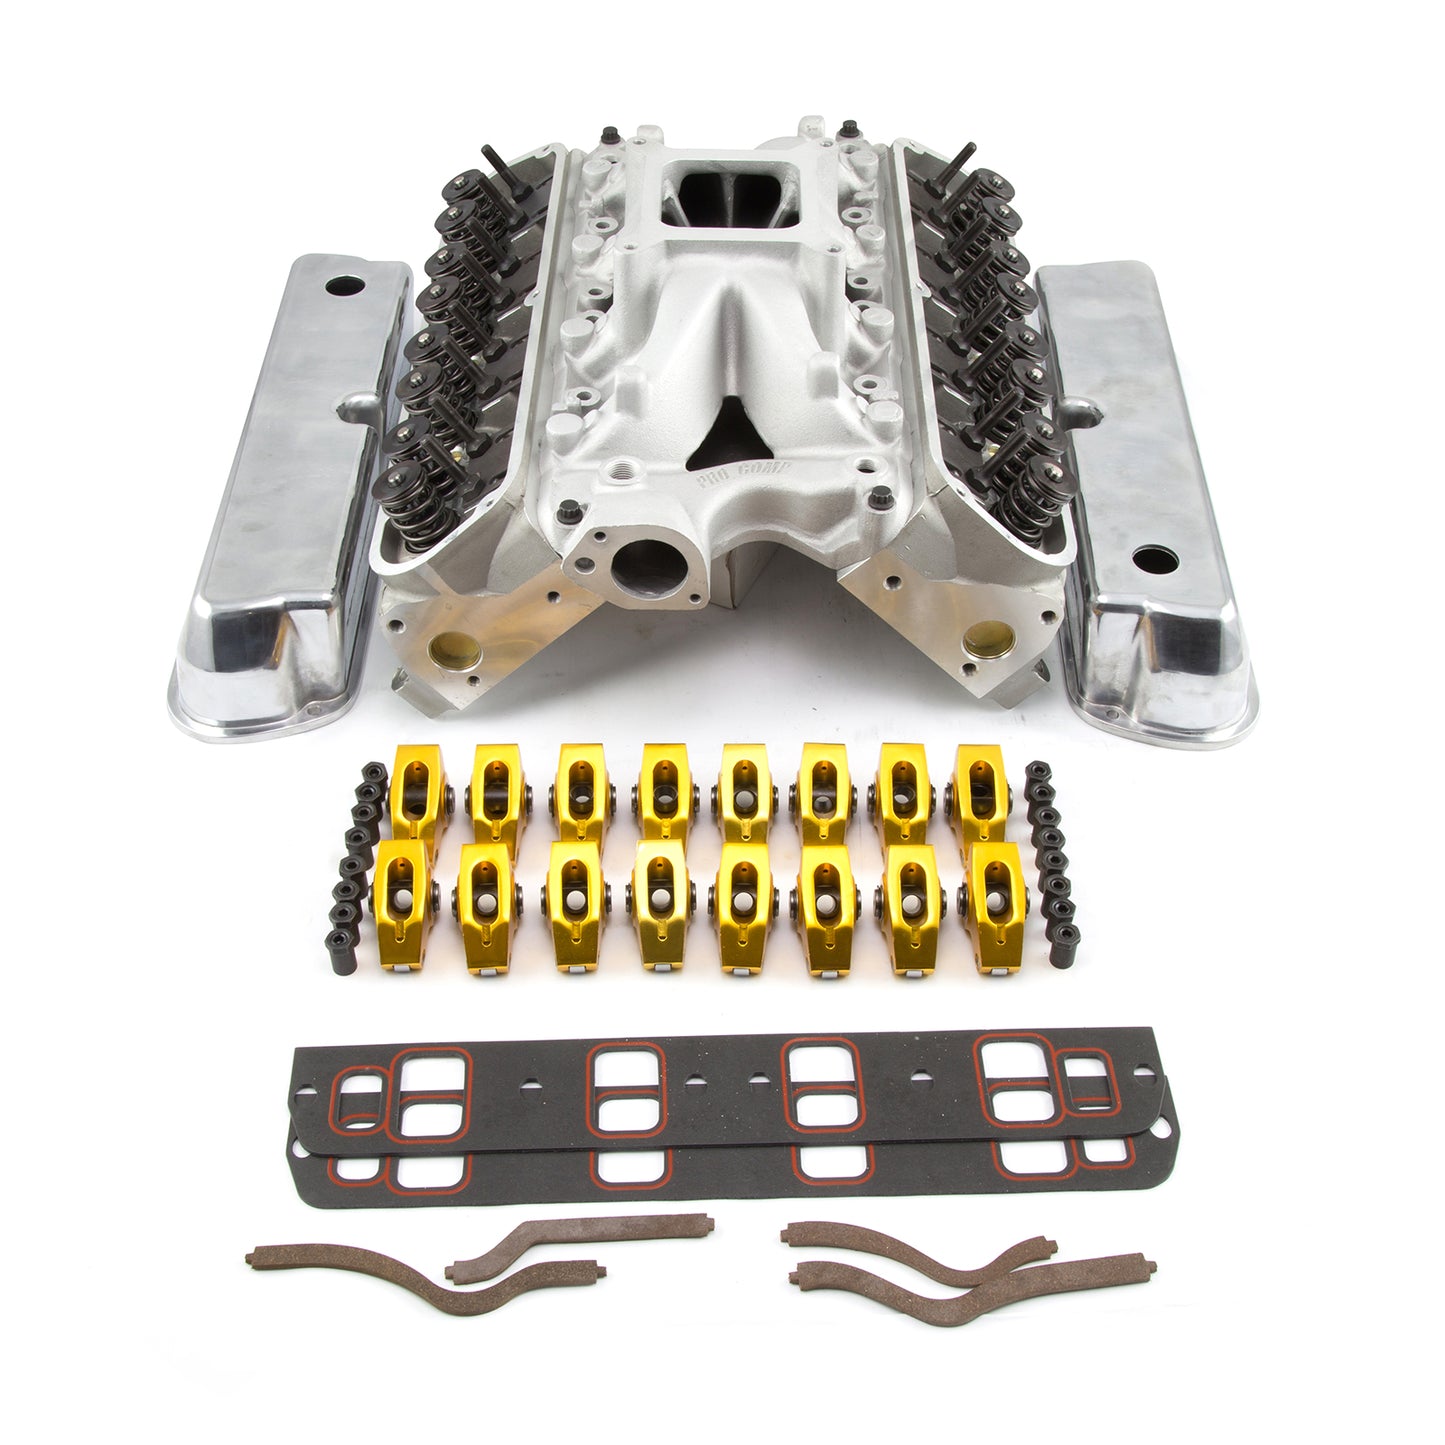 Speedmaster PCE435.1027 Fits Ford SB 289 302 Hyd Roller 210cc Cylinder Head Top End Engine Combo Kit